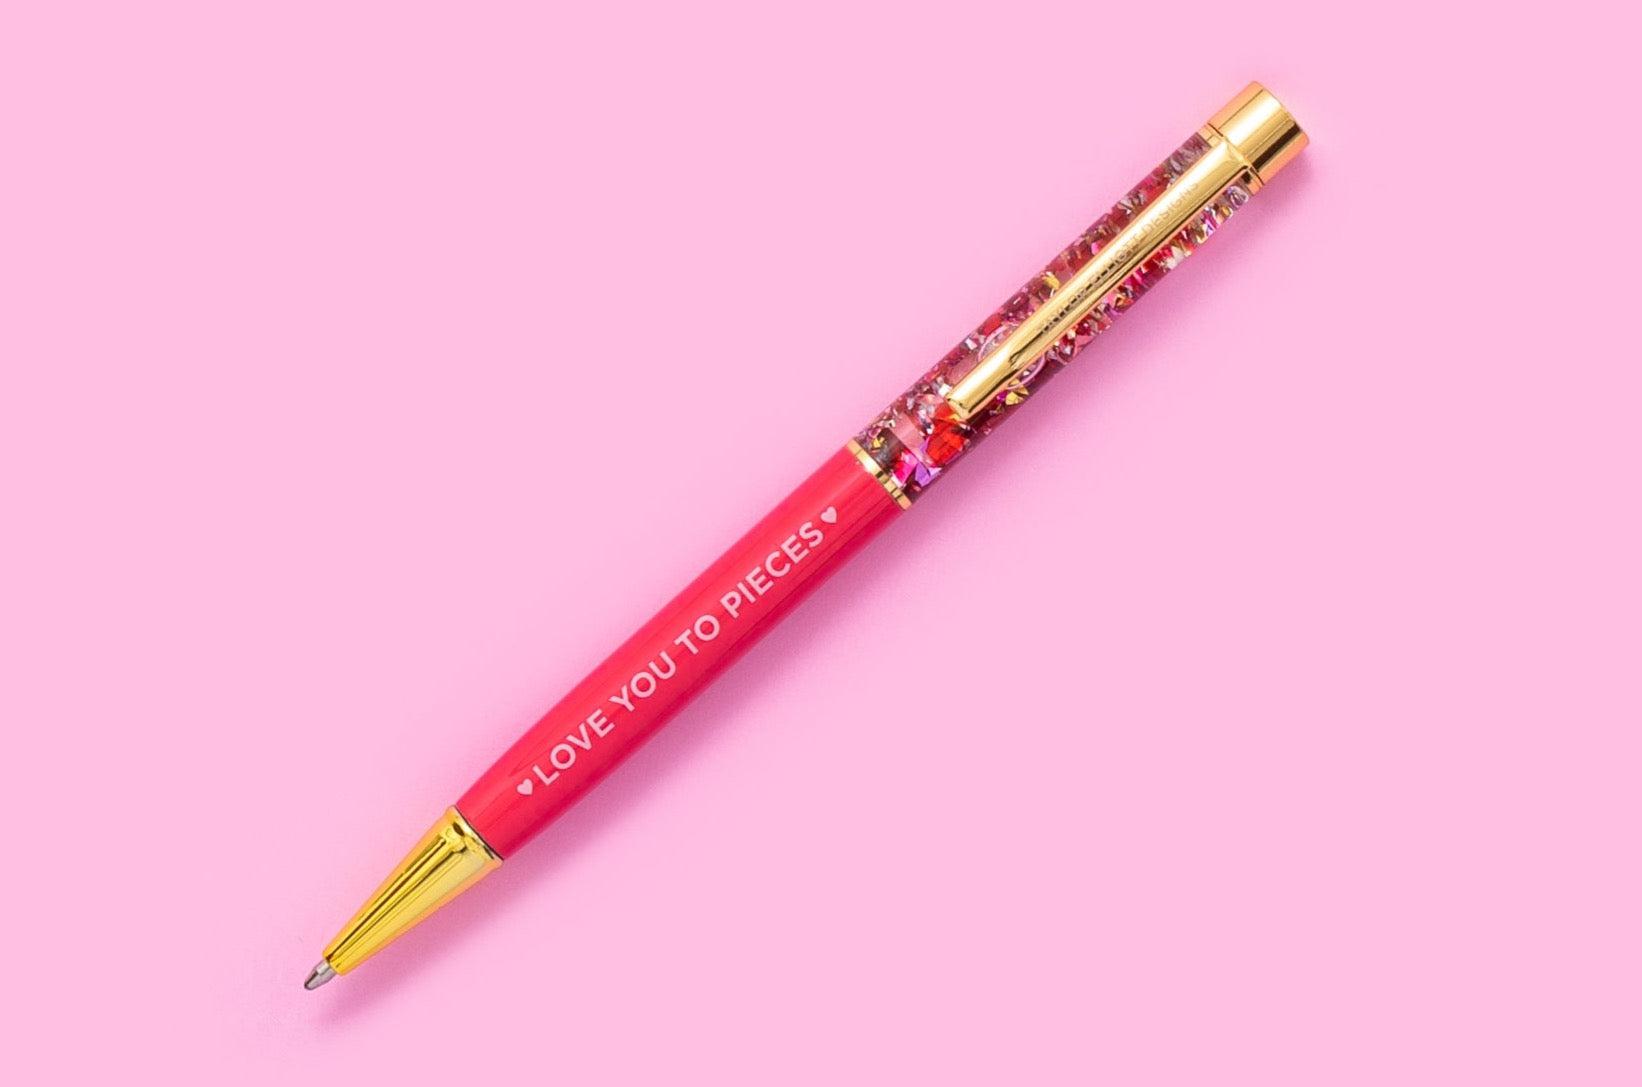 Shop “Love You to Pieces” Confetti Pen-Stationary at Ruby Joy Boutique, a Women's Clothing Store in Pickerington, Ohio